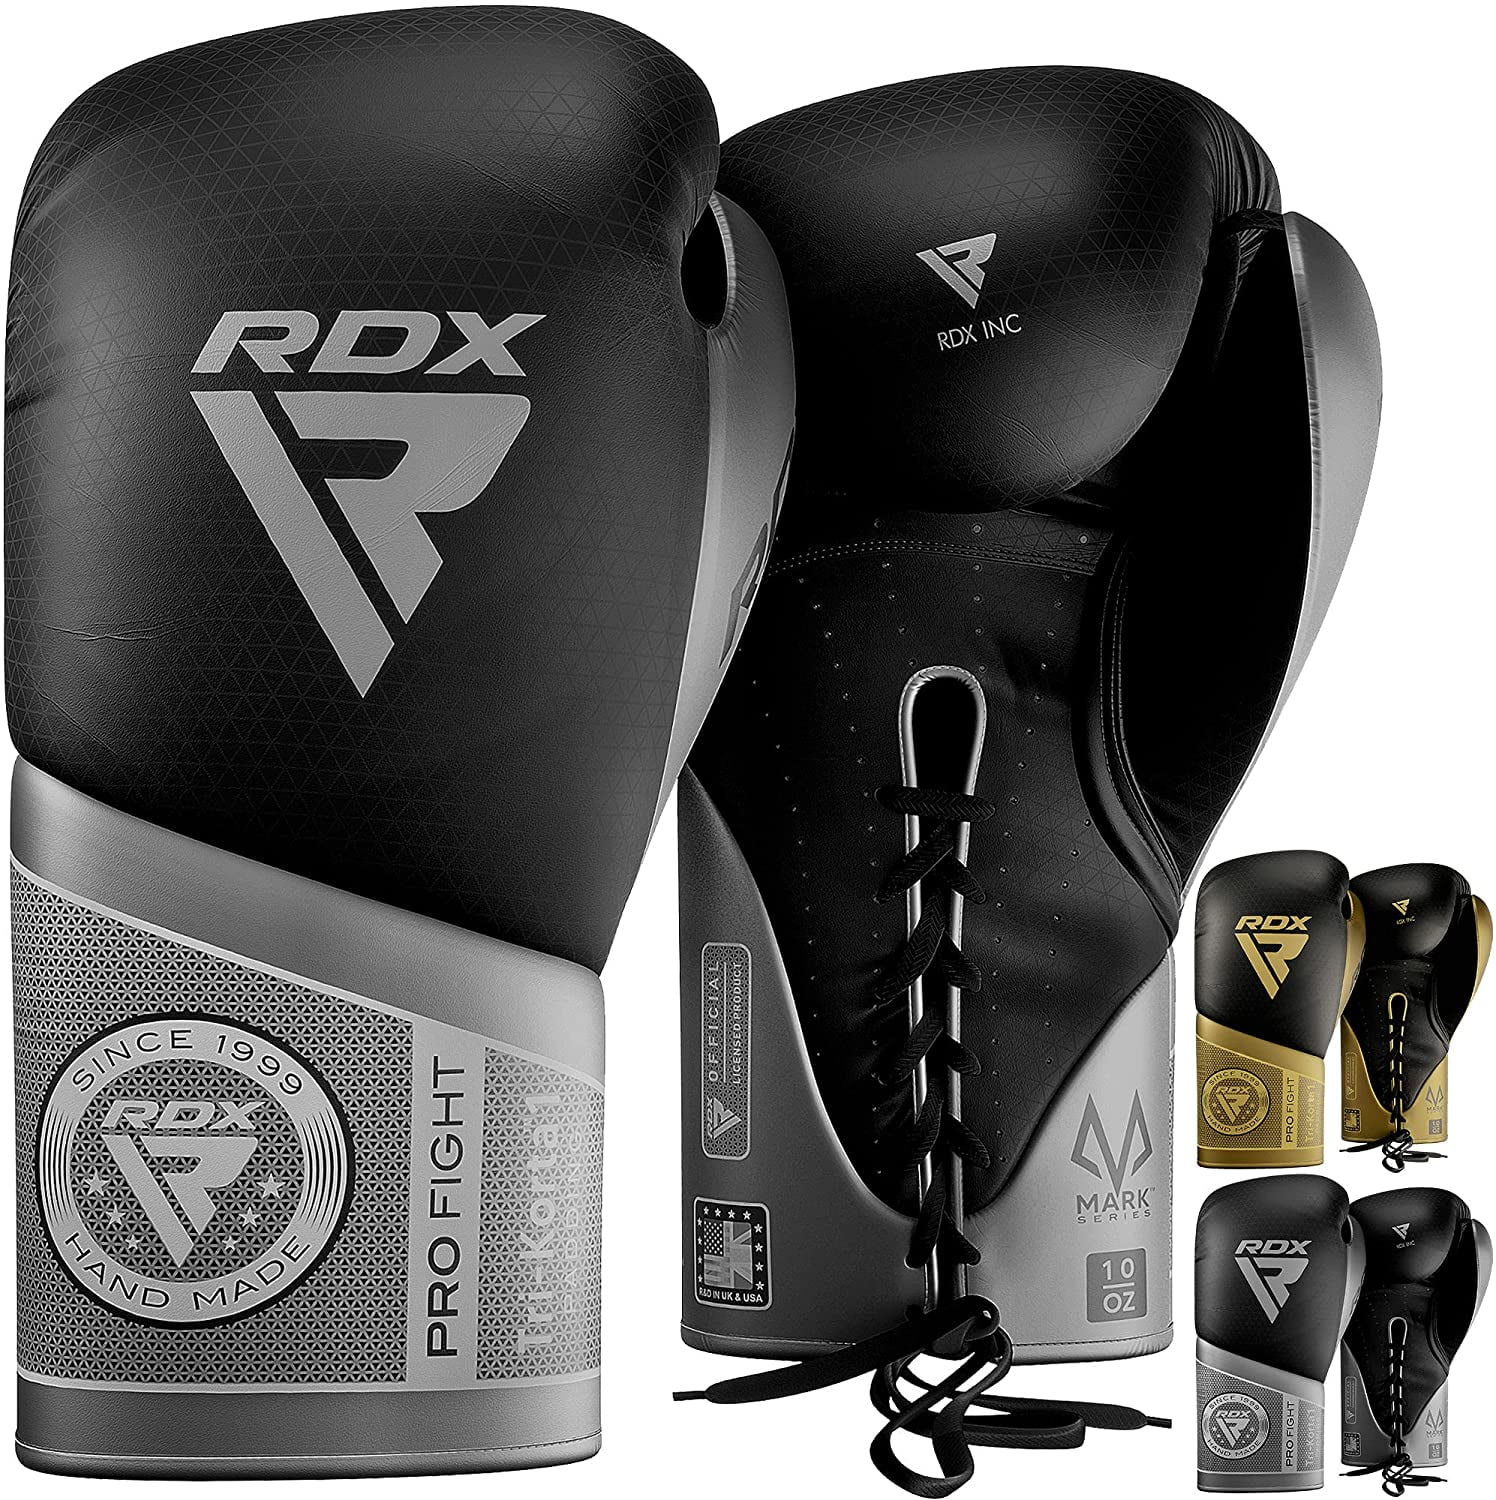 Men Black Kickboxing Heavy Punching Bag Focus Mitts Pads Double End Ball Workout Ventilated Palm RDX Boxing Gloves Sparring Muay Thai Pro Training Maya Hide Leather MMA Fitness Gym Bagwork